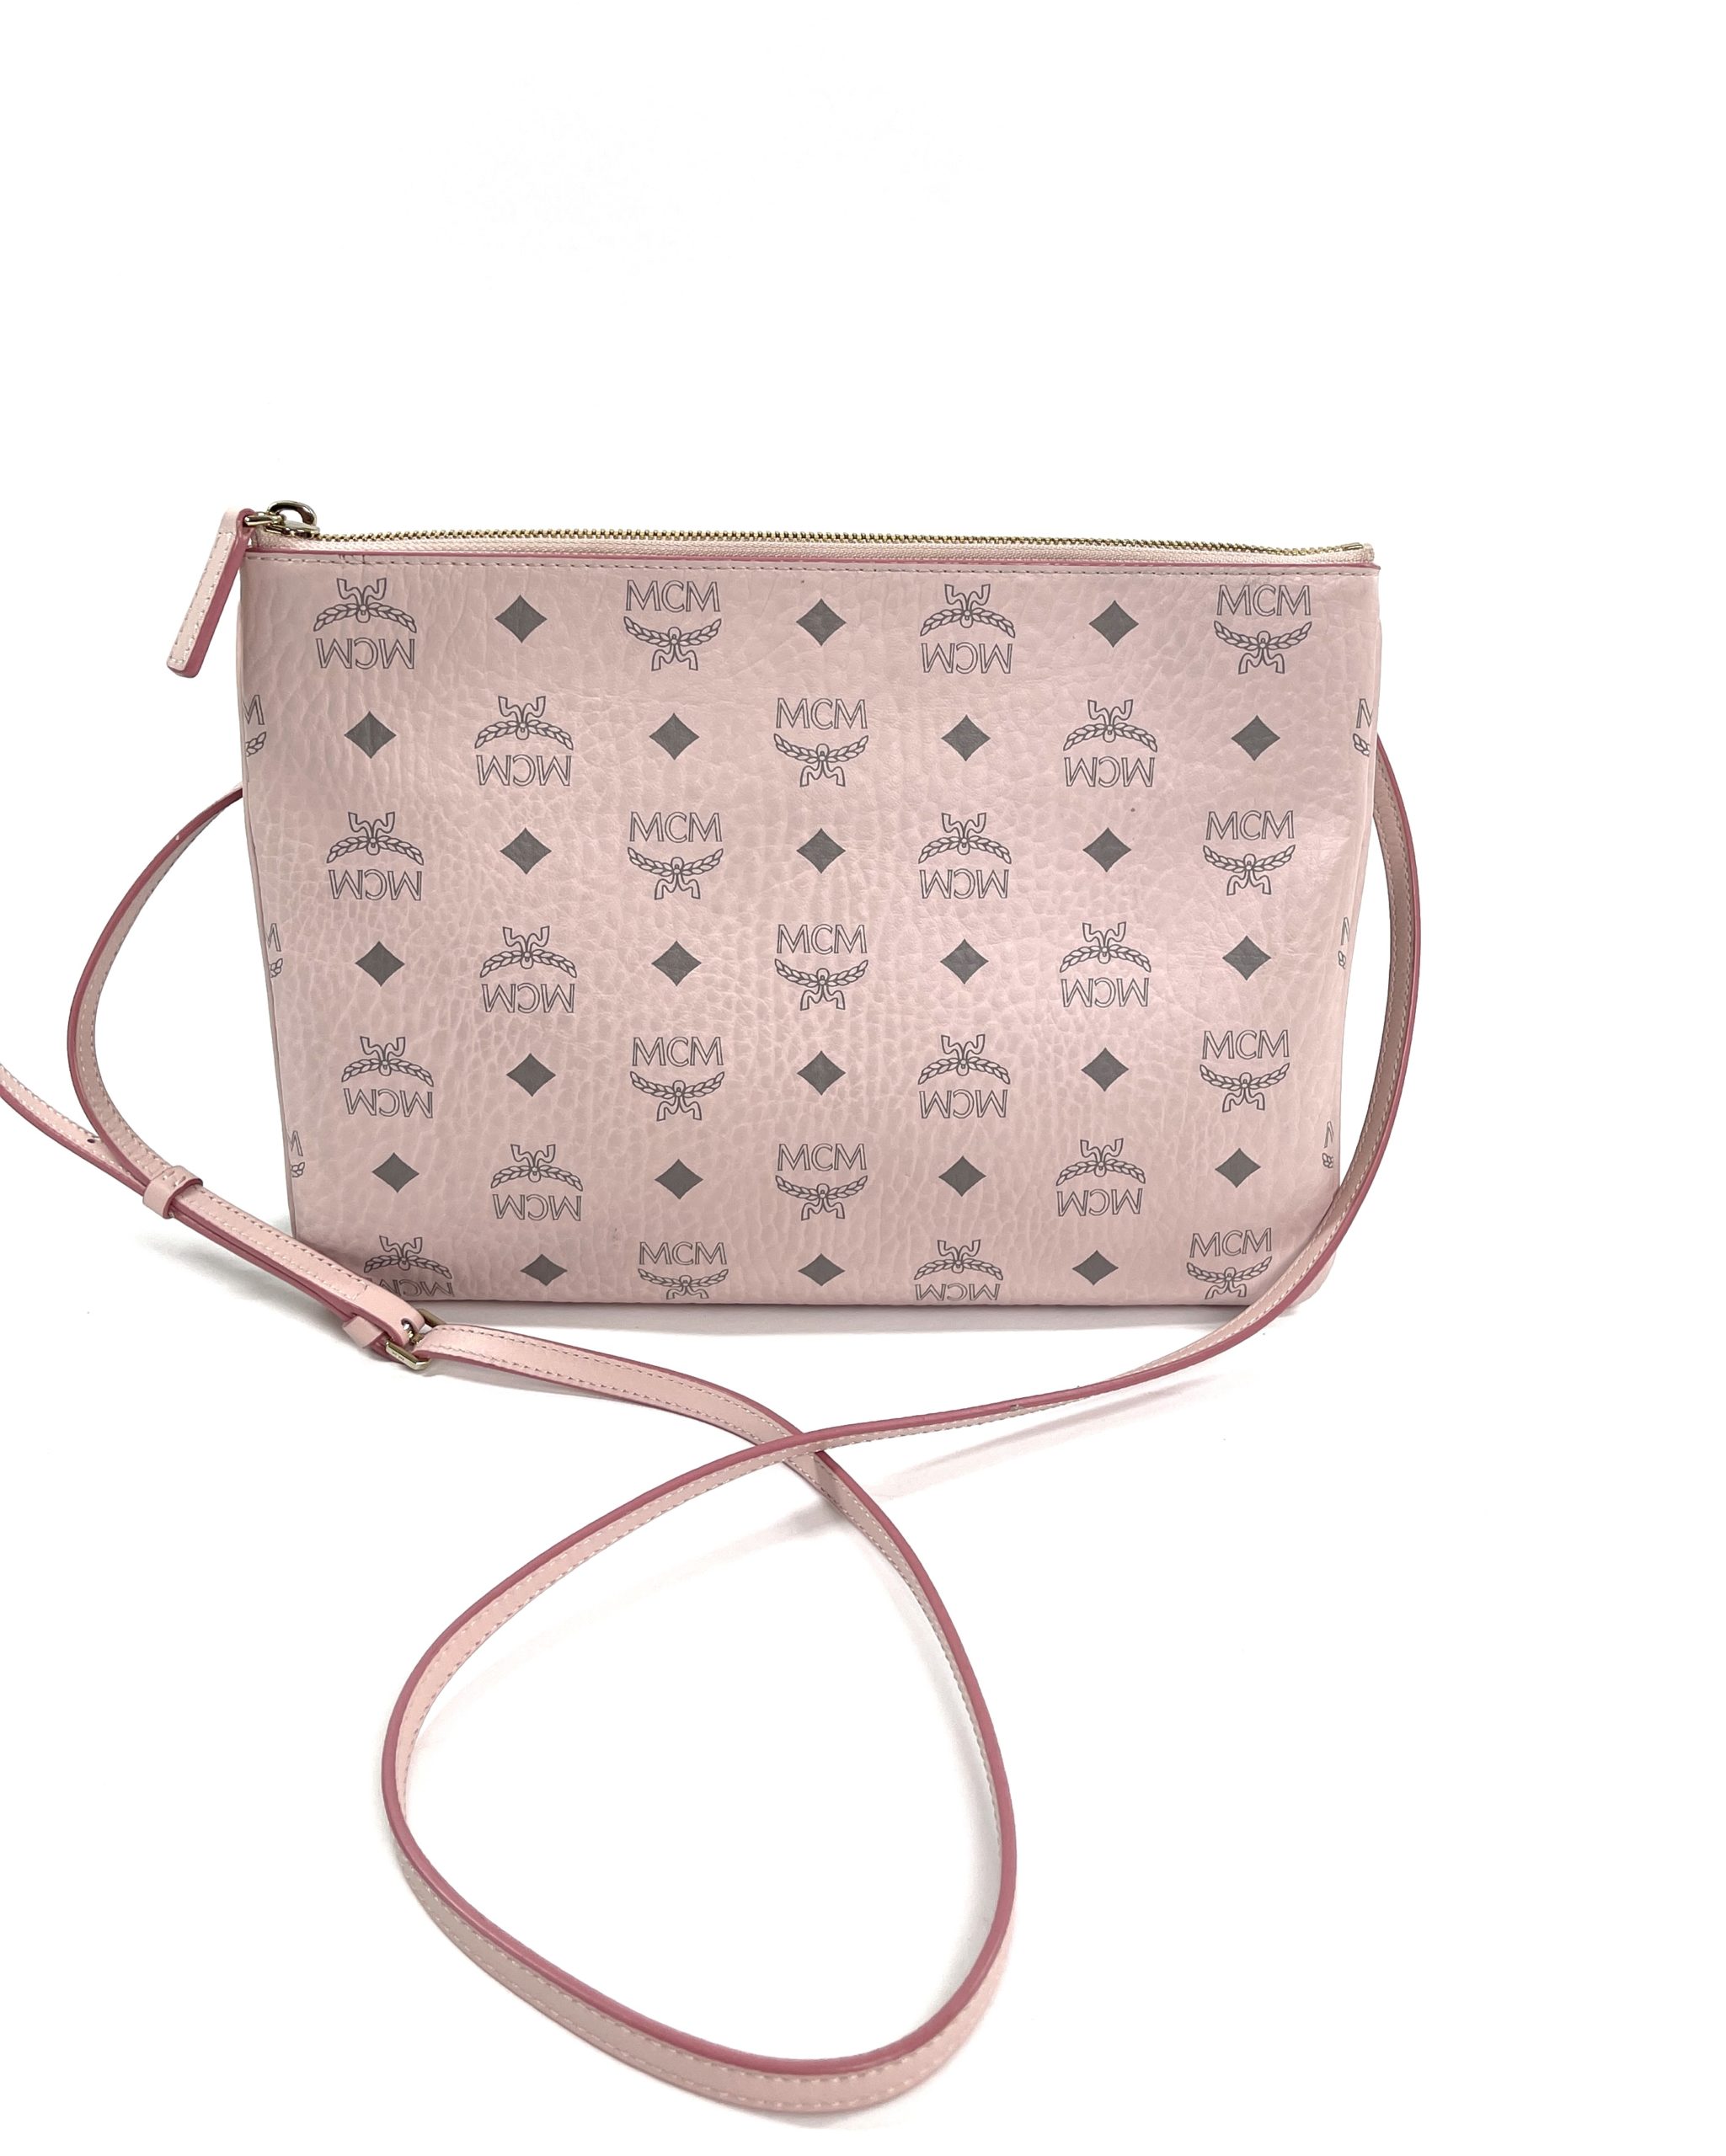 MCM Pouch Crossbody Visetos Medium Soft Pink in Coated Canvas with